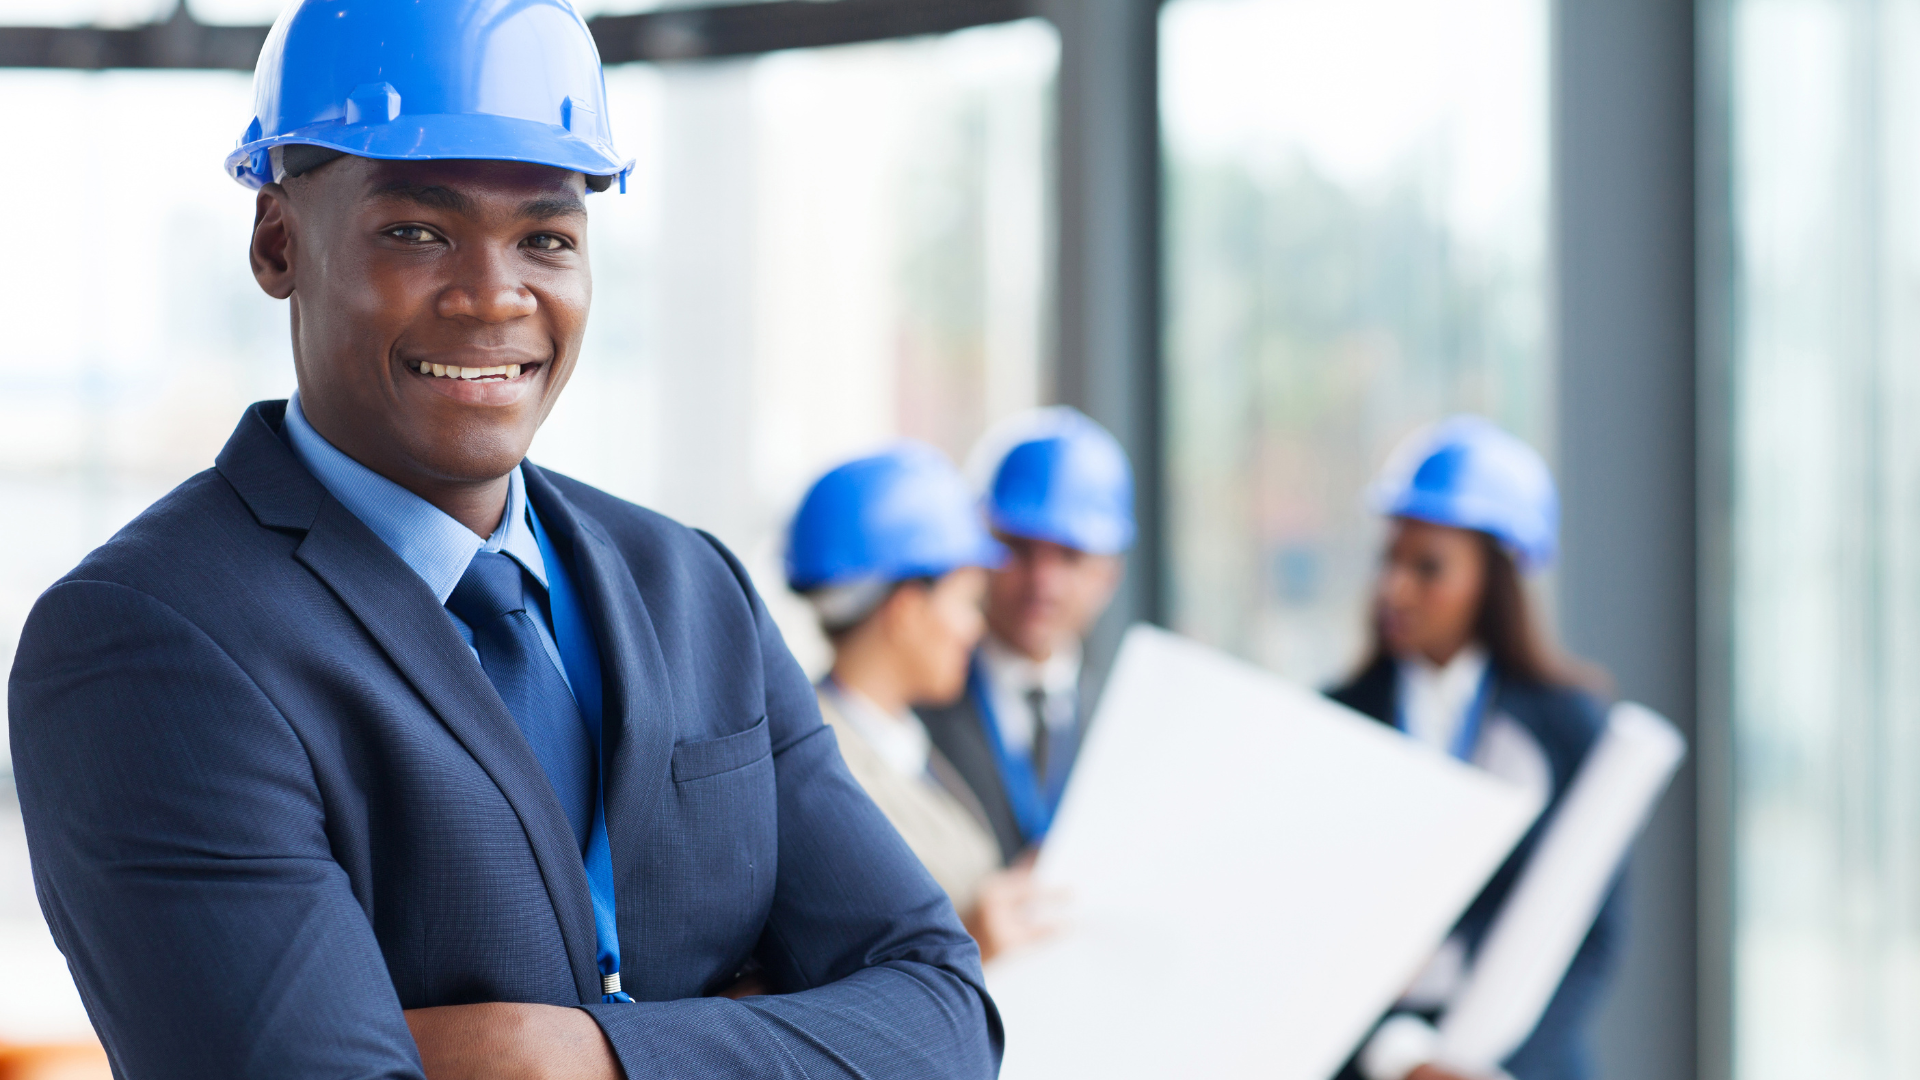 A construction person in a hard hat with colleagues blurred in the background